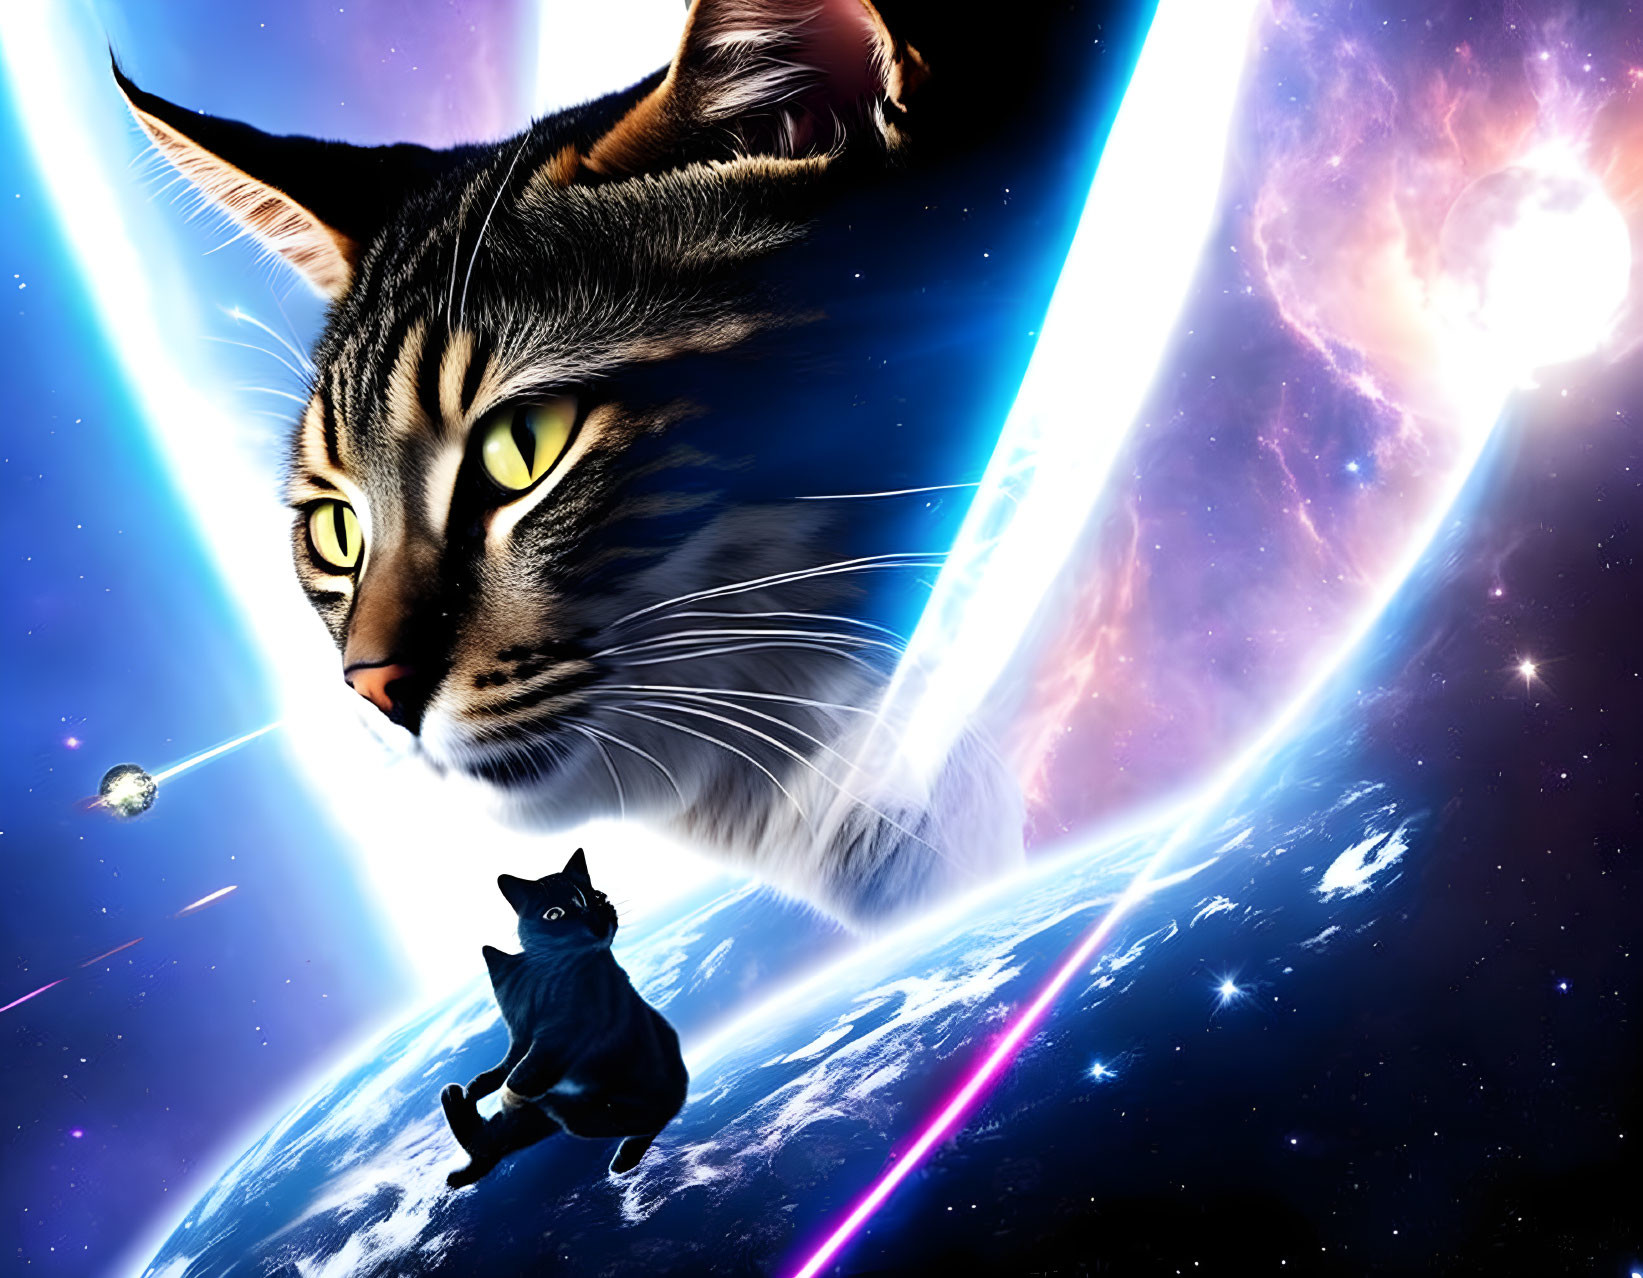 Giant cat's face eclipses Earth with cosmic background